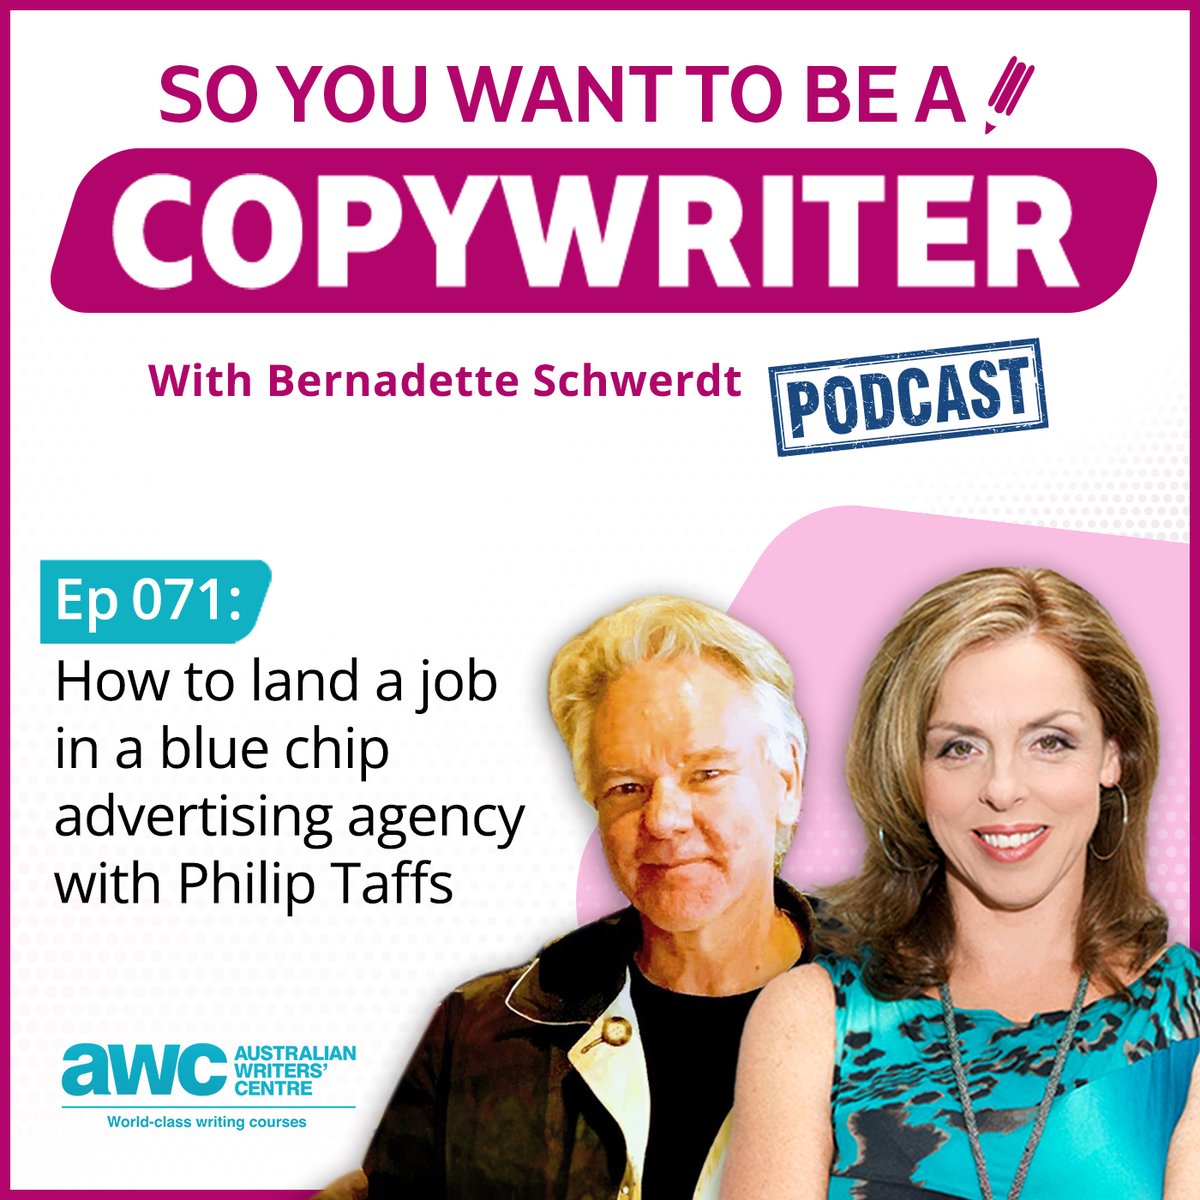 How to land a job in a blue chip advertising agency with Philip Taffs. Listen to the latest episode of 'So You Want to be a Copywriter' on your favourite podcast app, or follow the link: writerscentre.com.au/blog/copywrite…